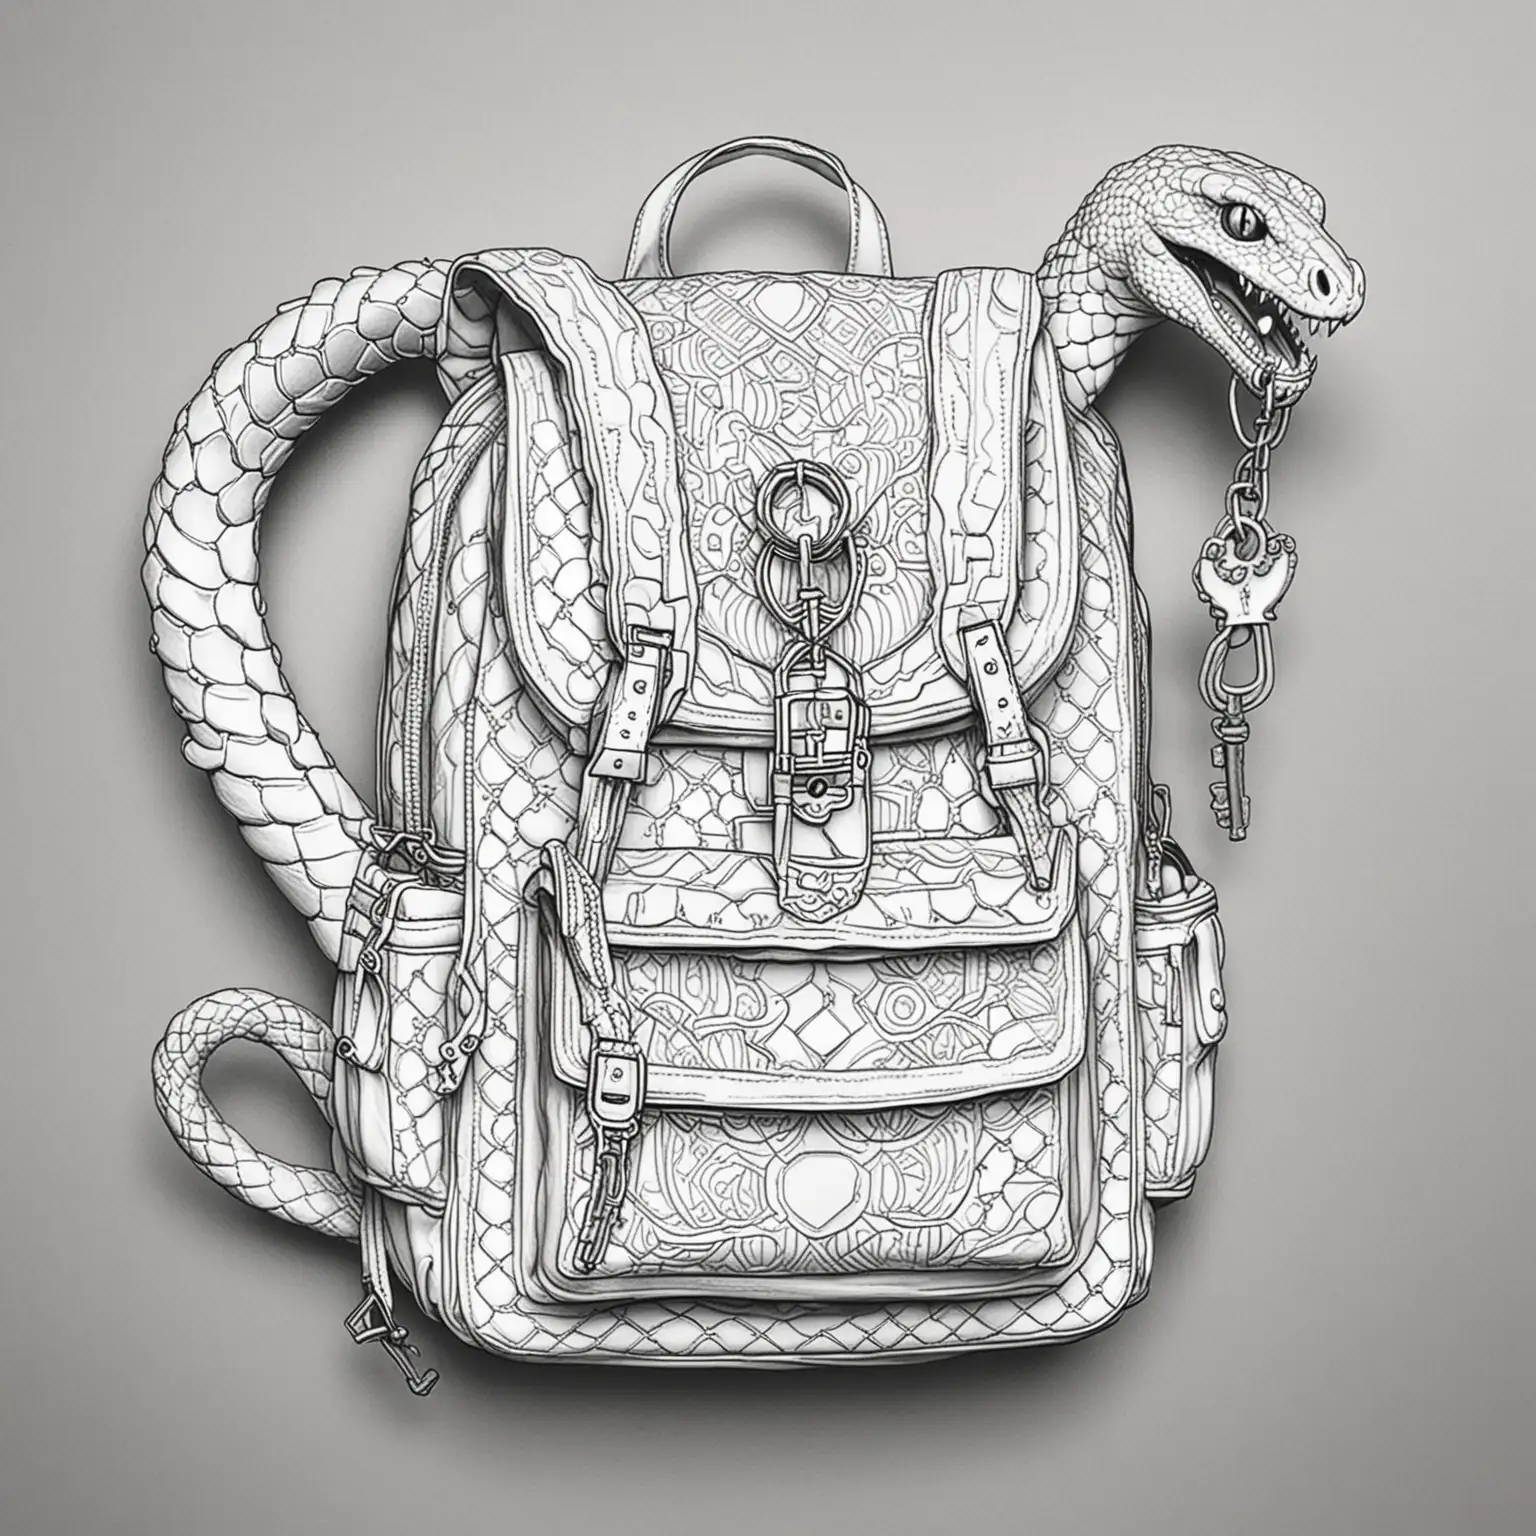 Monochrome Coloring Page Snake Backpack with Oversized Key